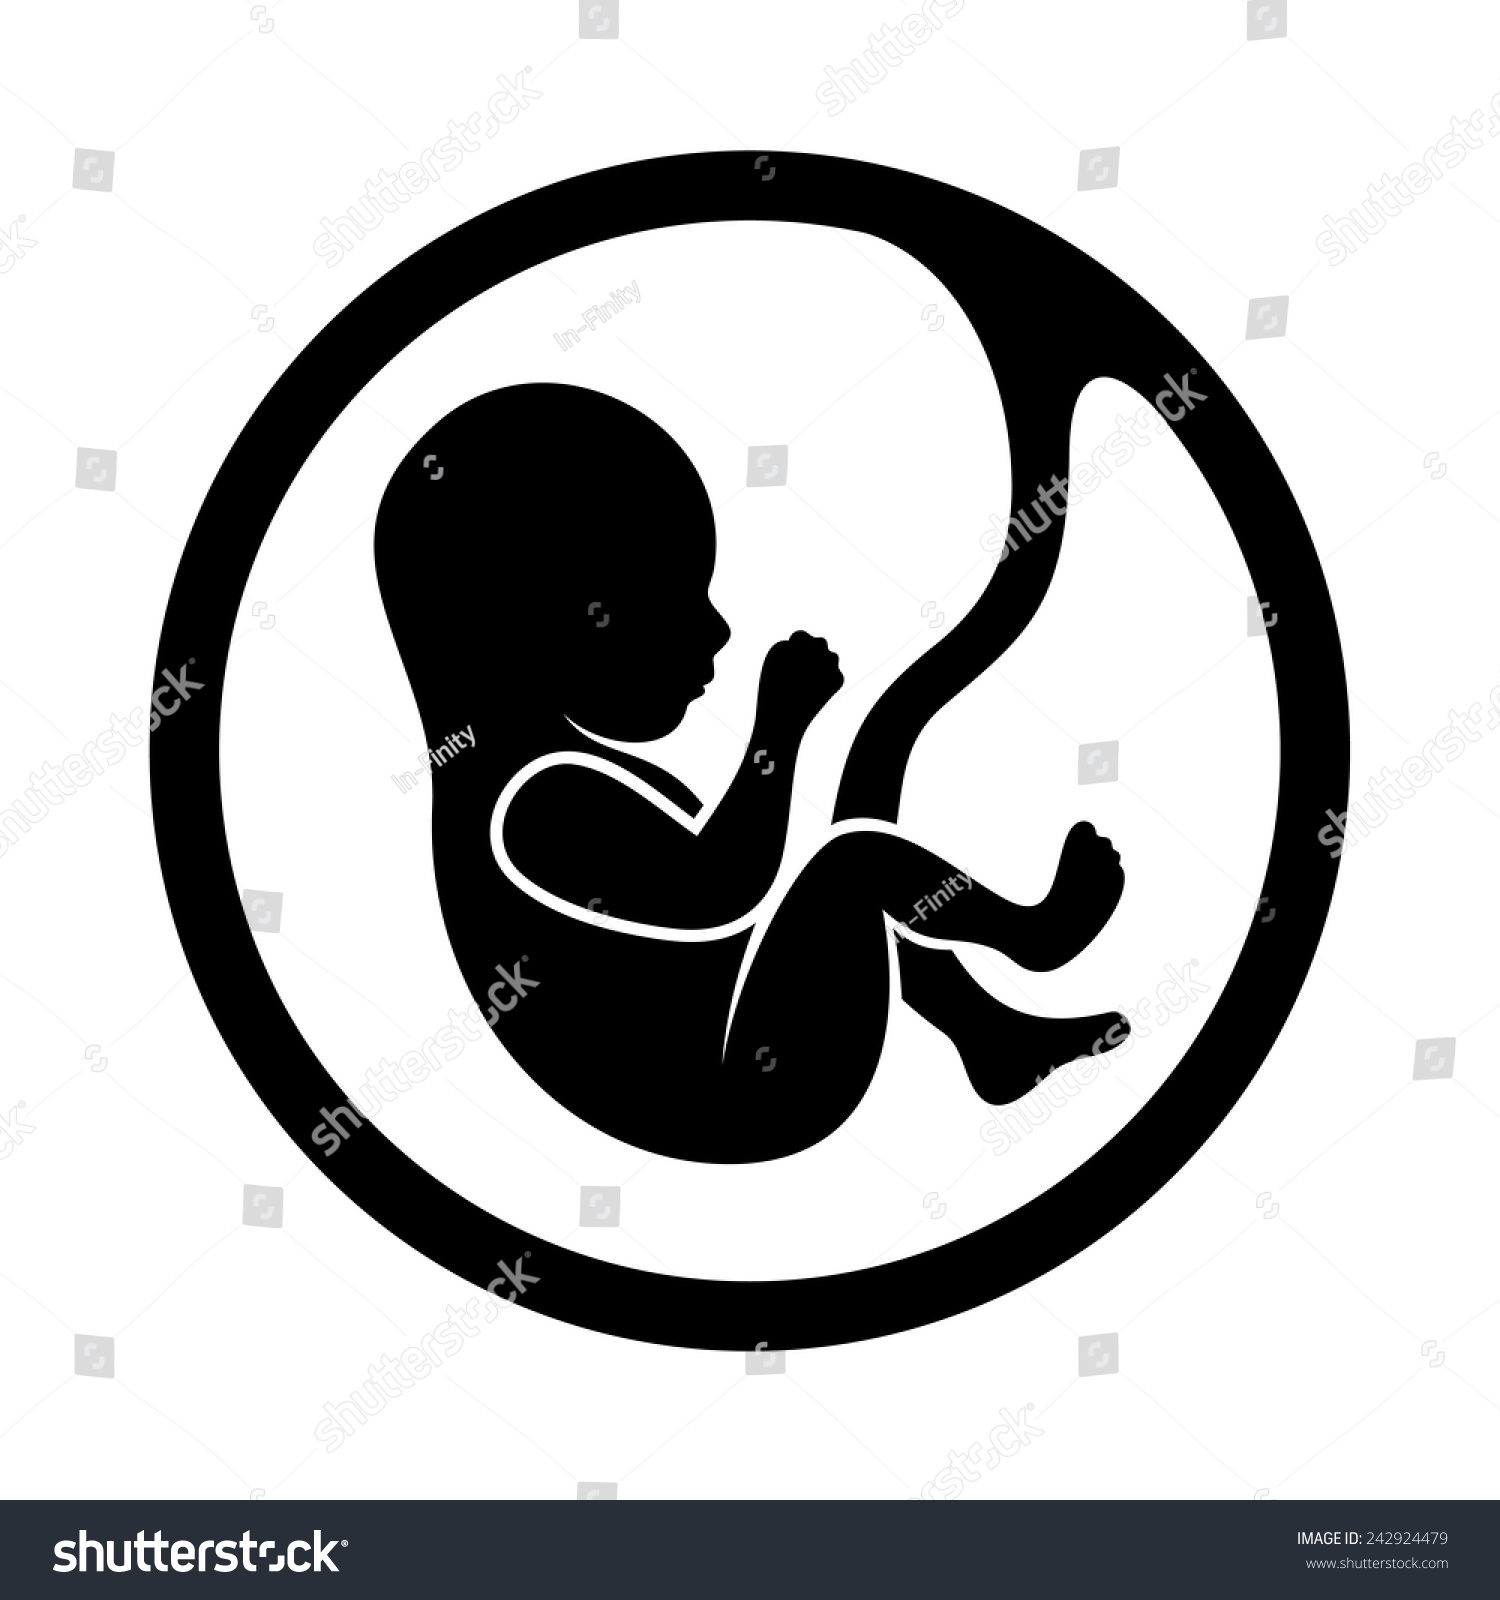 baby ultrasound clipart - photo #35